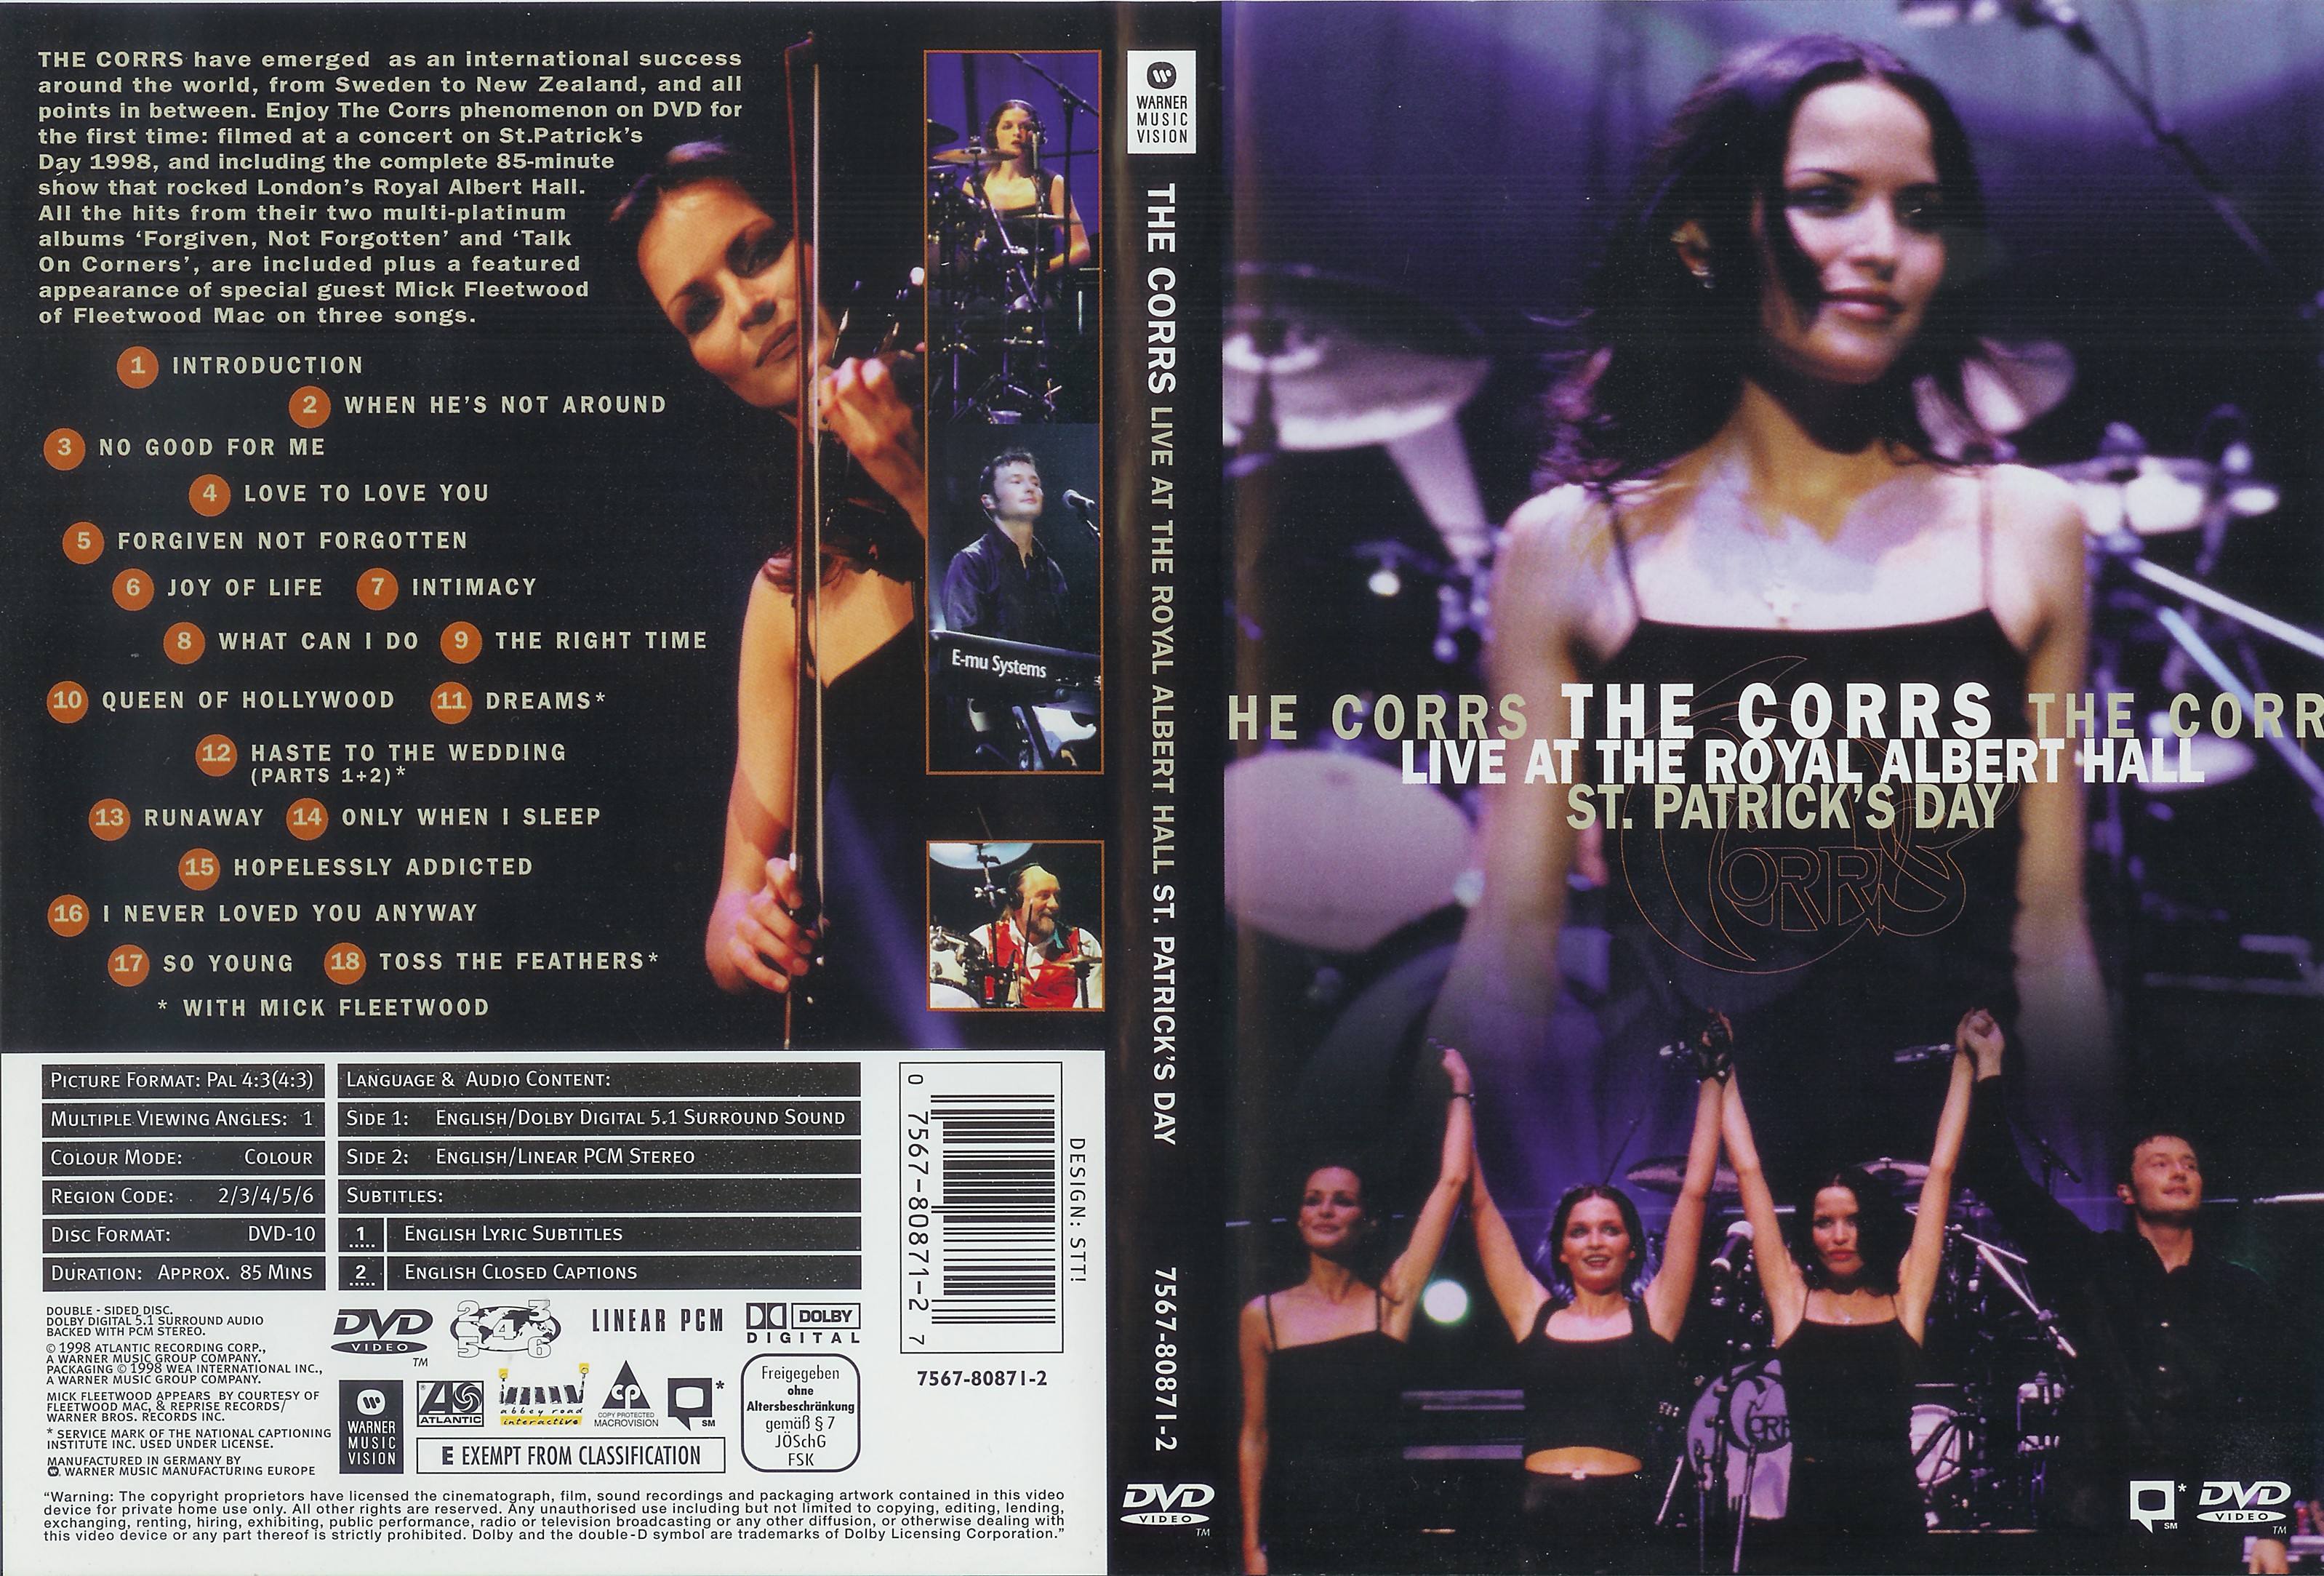 Jaquette DVD The Corrs - Live at the Royal Albert Hall